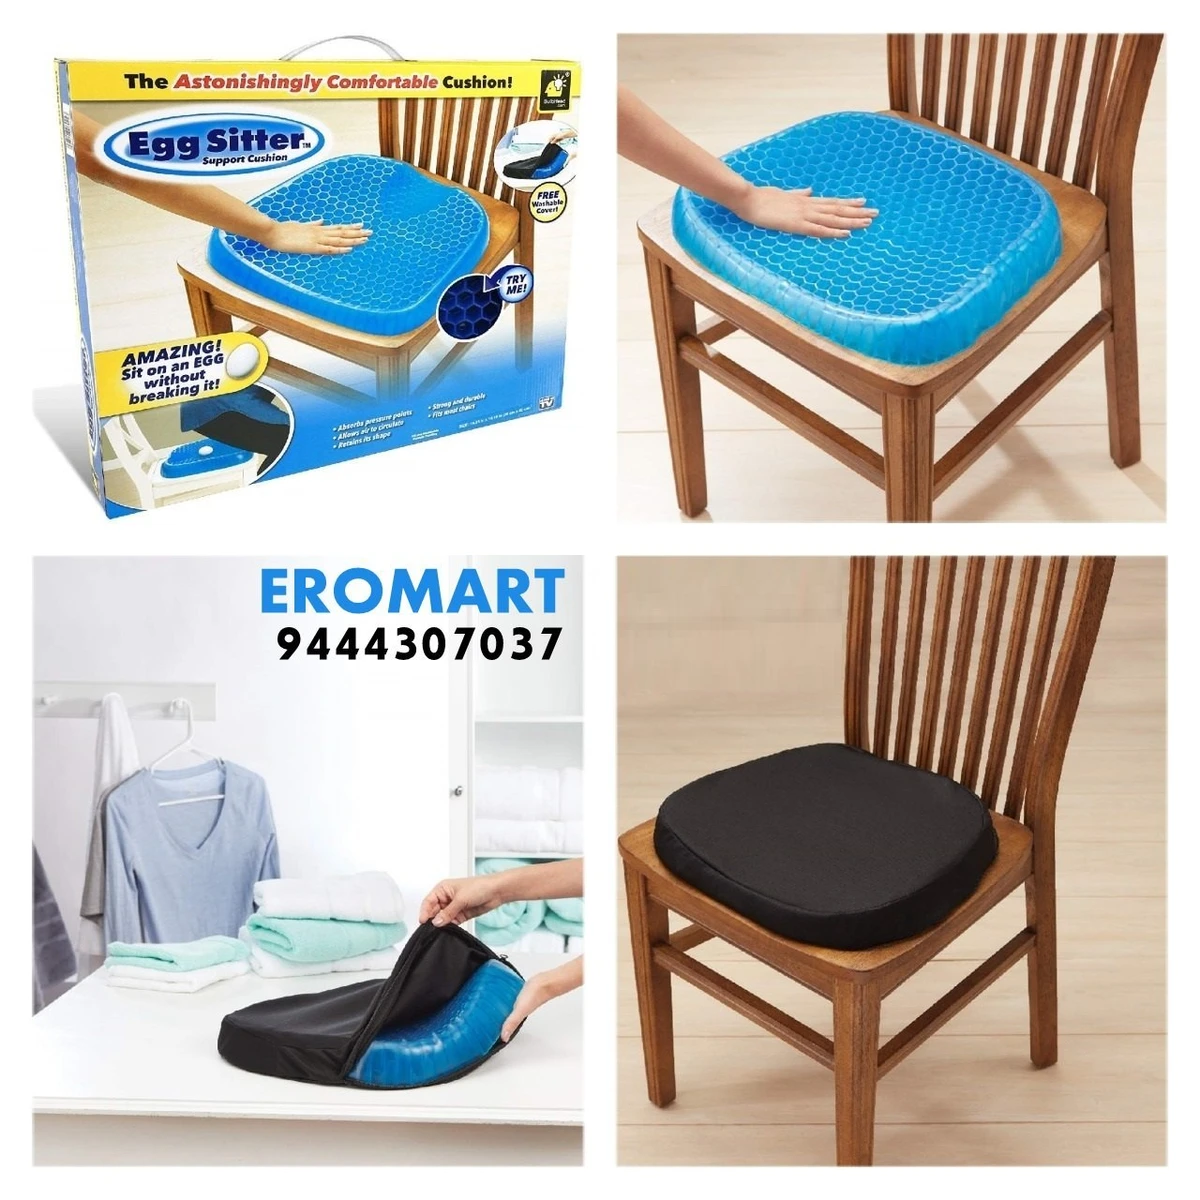 1 Pcs Silicone Comfortable Egg Sitter Seat Cushion for Office Car Home Chair